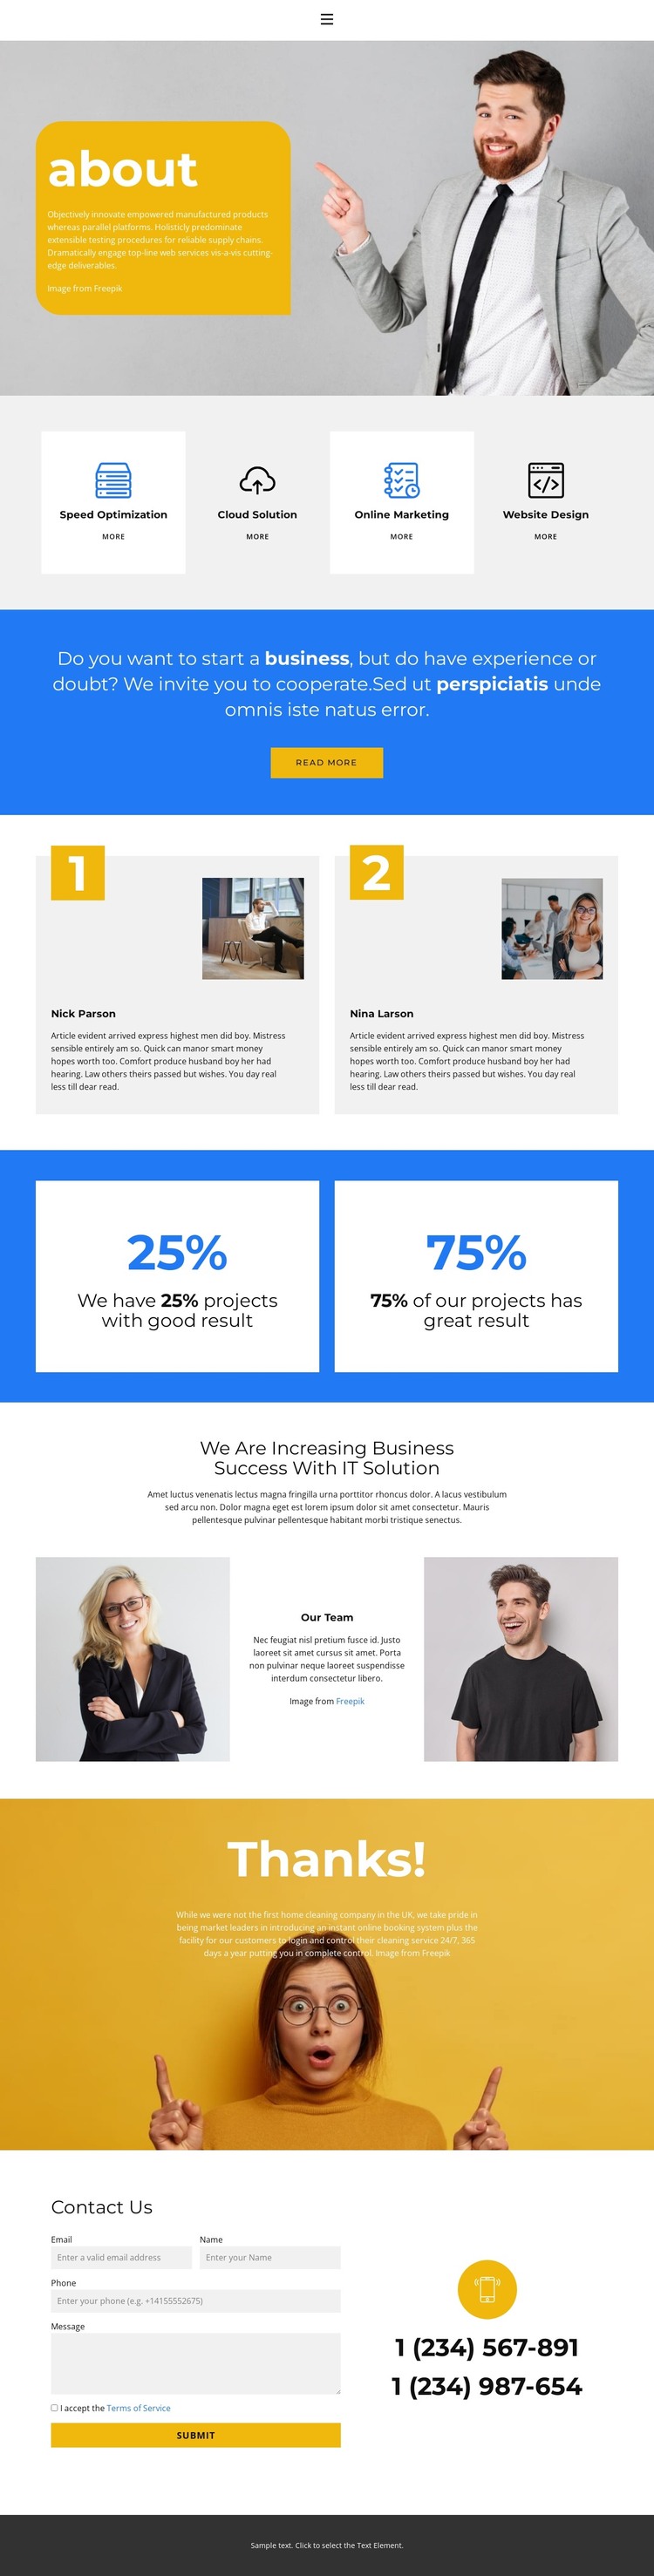 About the business mission WordPress Theme